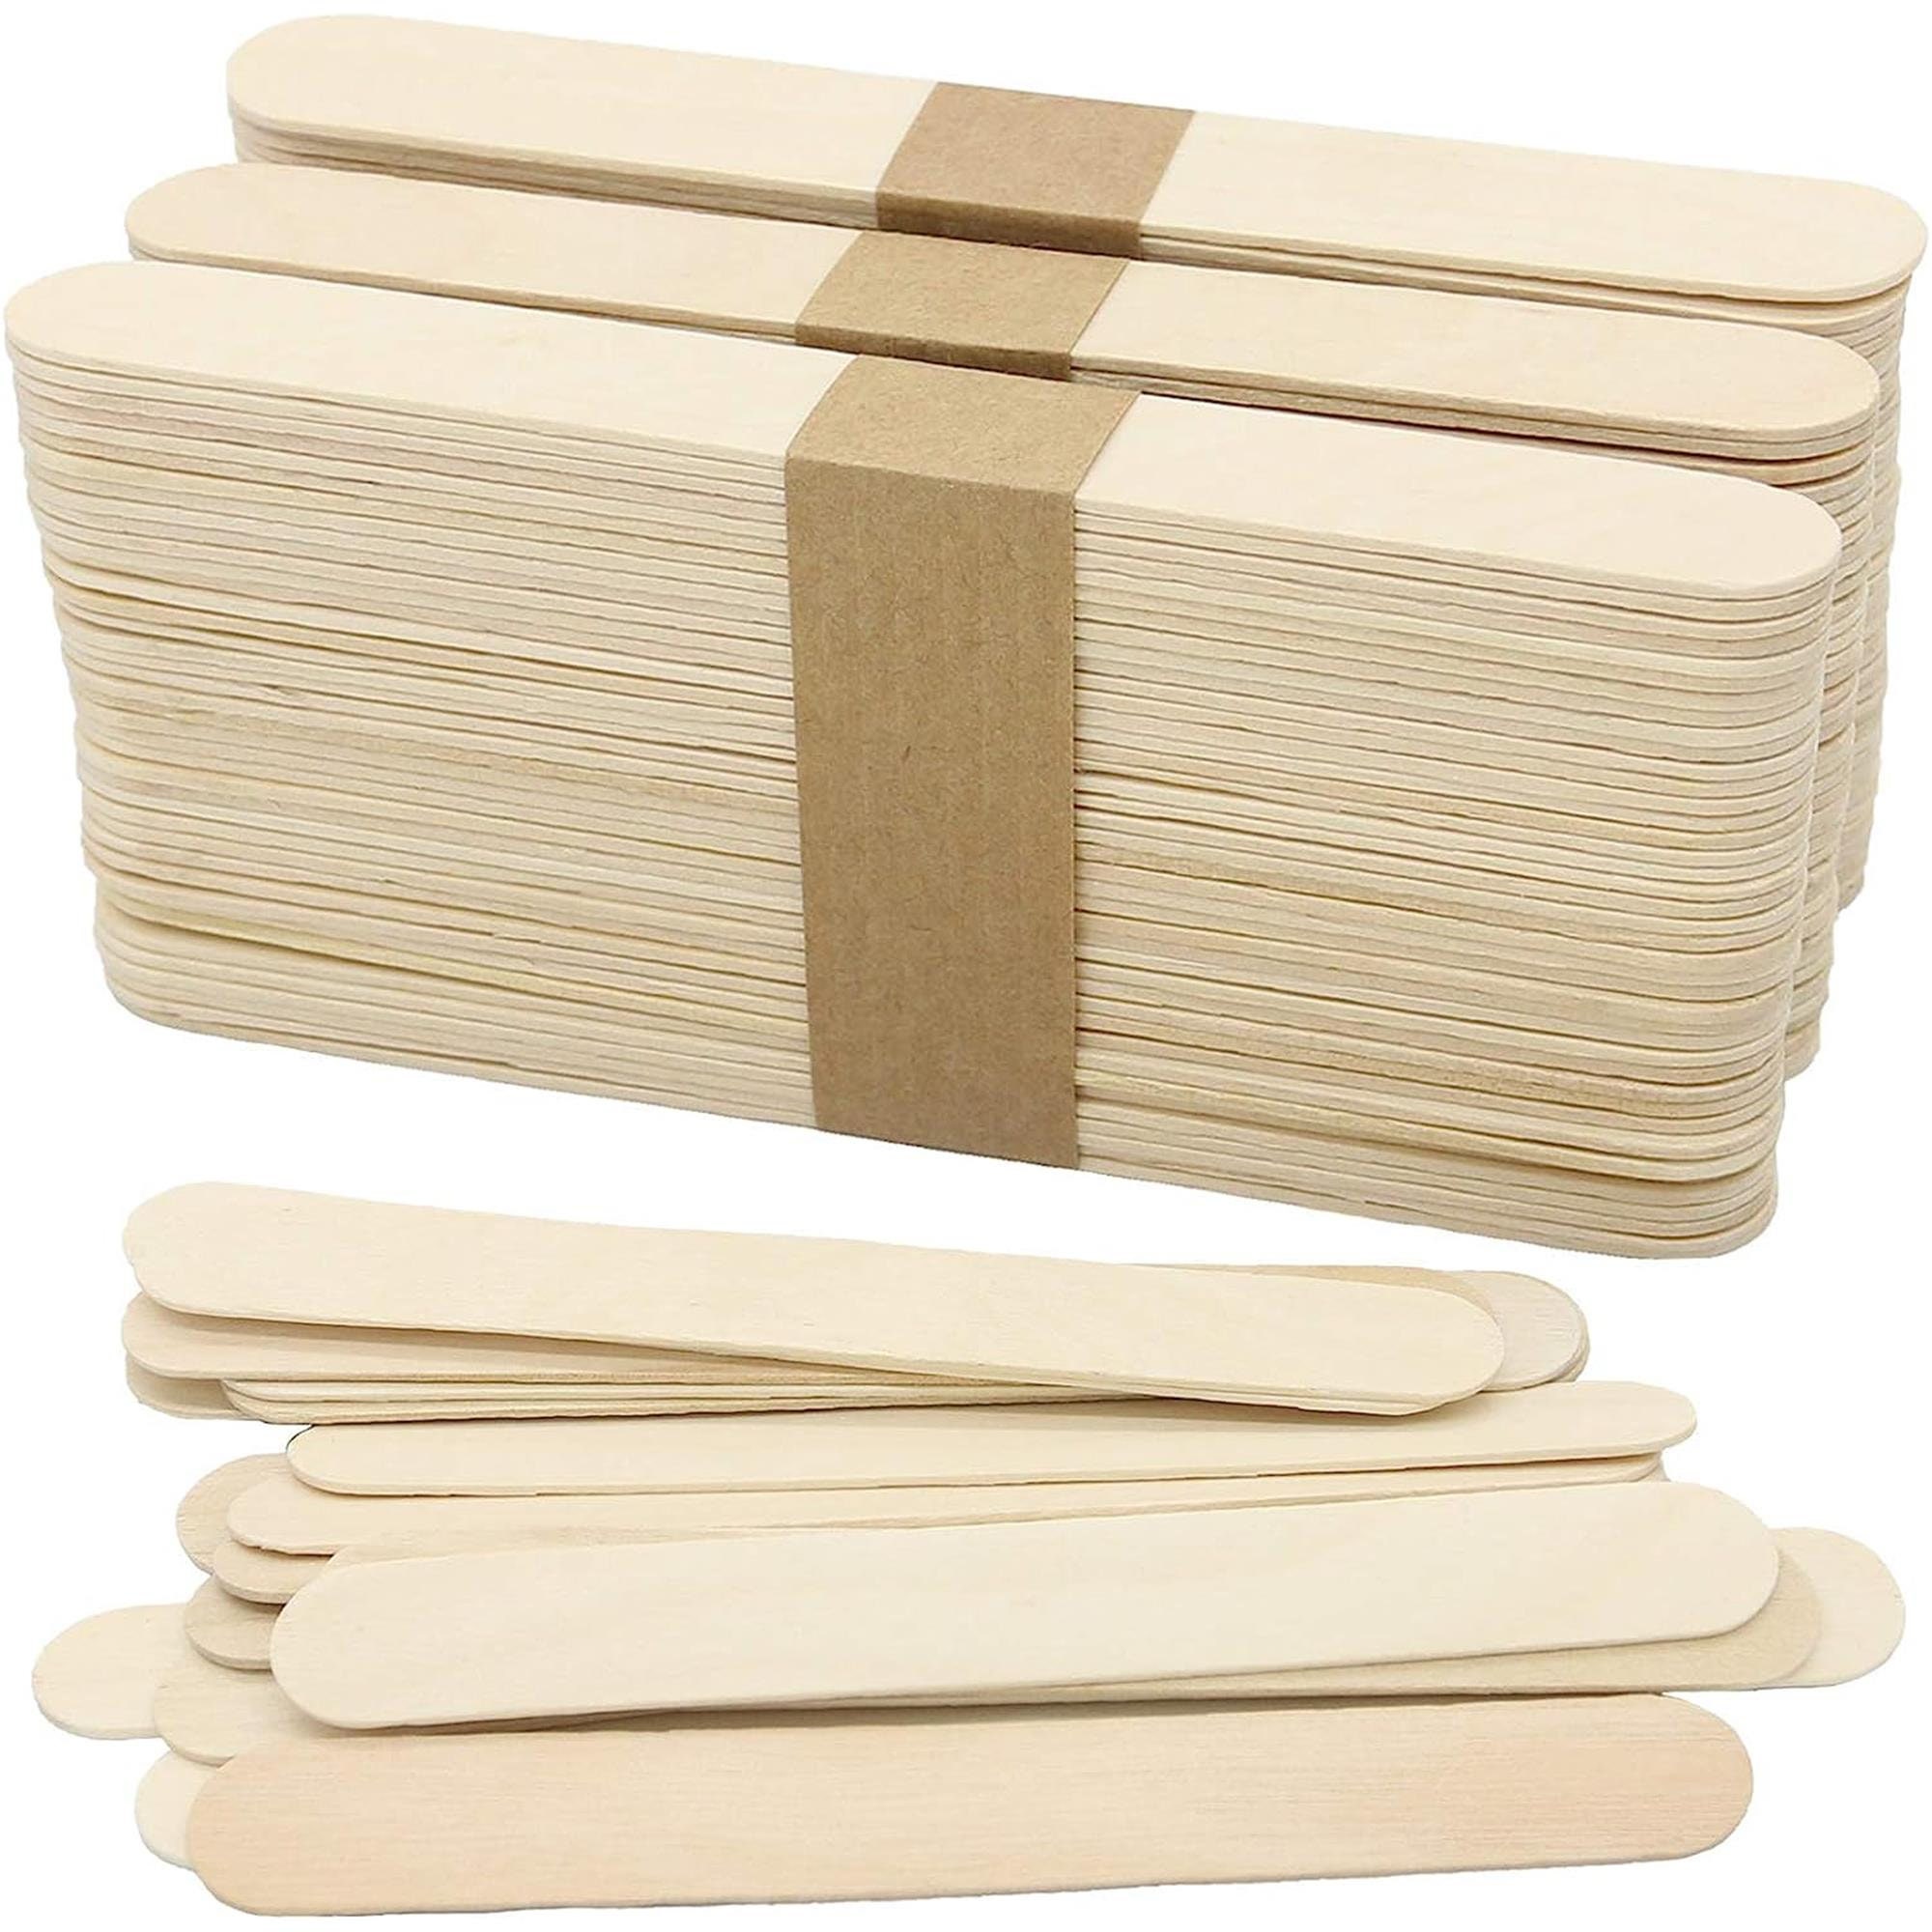 100pcs Large Jumbo Popsicle Craft Sticks 5.9 Inches Ice Cream Sticks Wooden  Garden Label Wooden Waxing Sticks Premium Natural Wood For DIY Crafts And